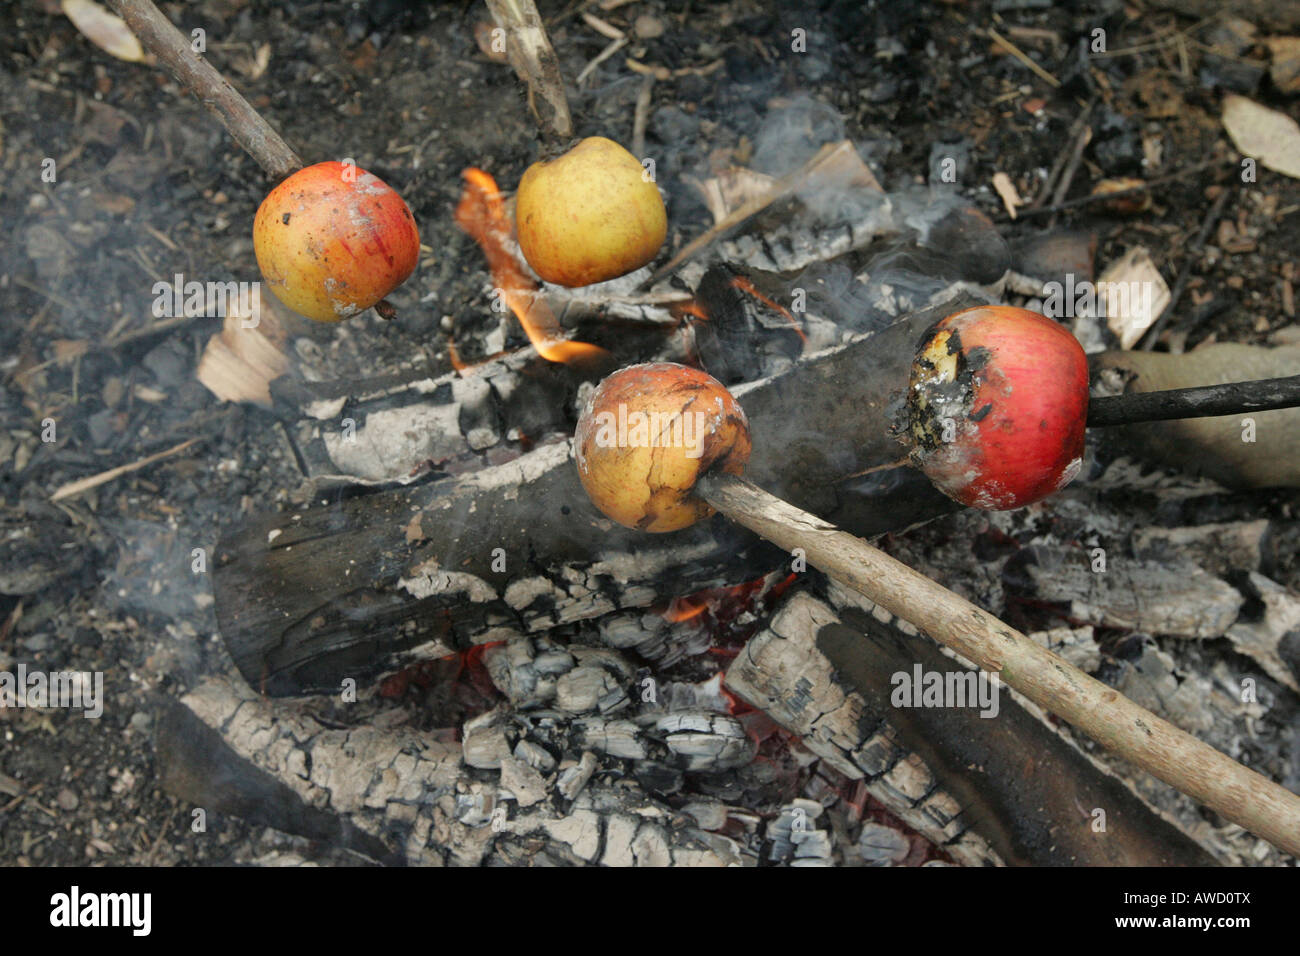 Apples roasting over a campfire Stock Photo